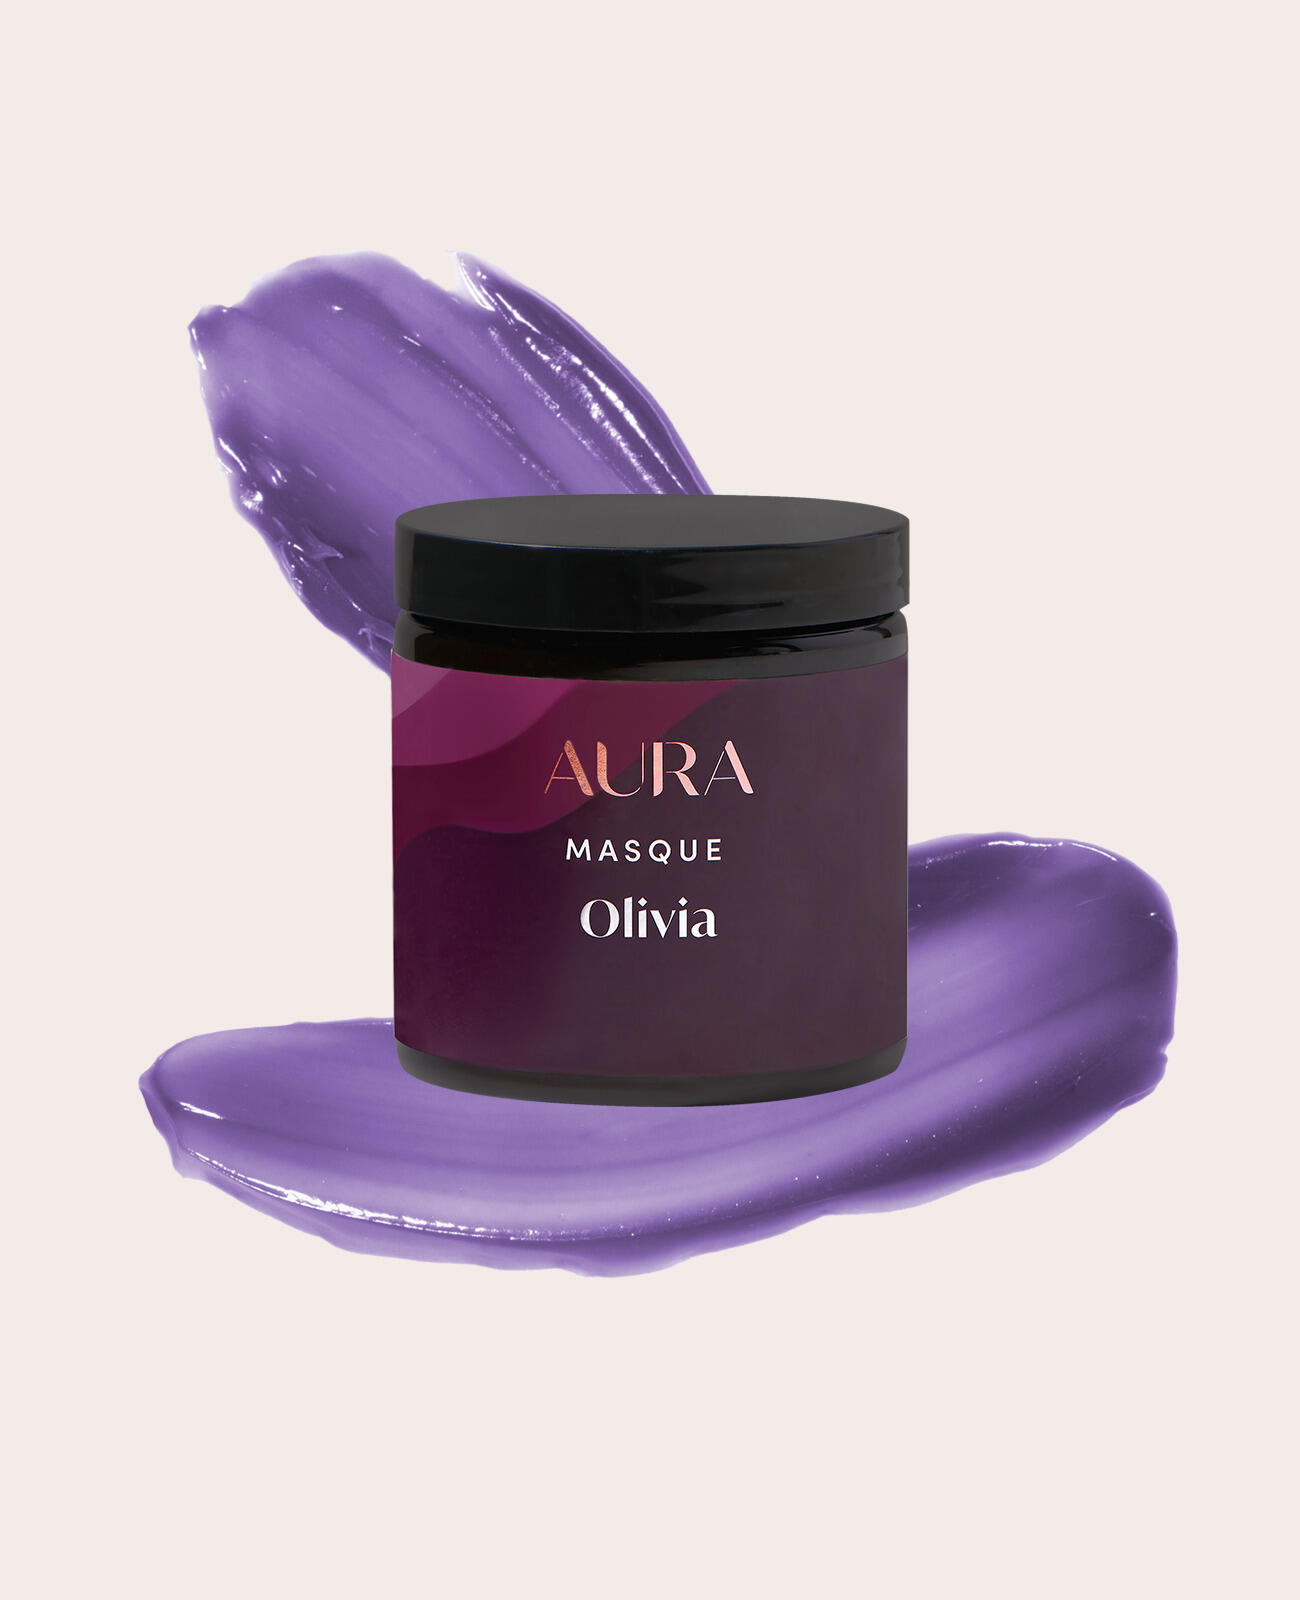 AURA personalized hair mask with irish lilac pigment